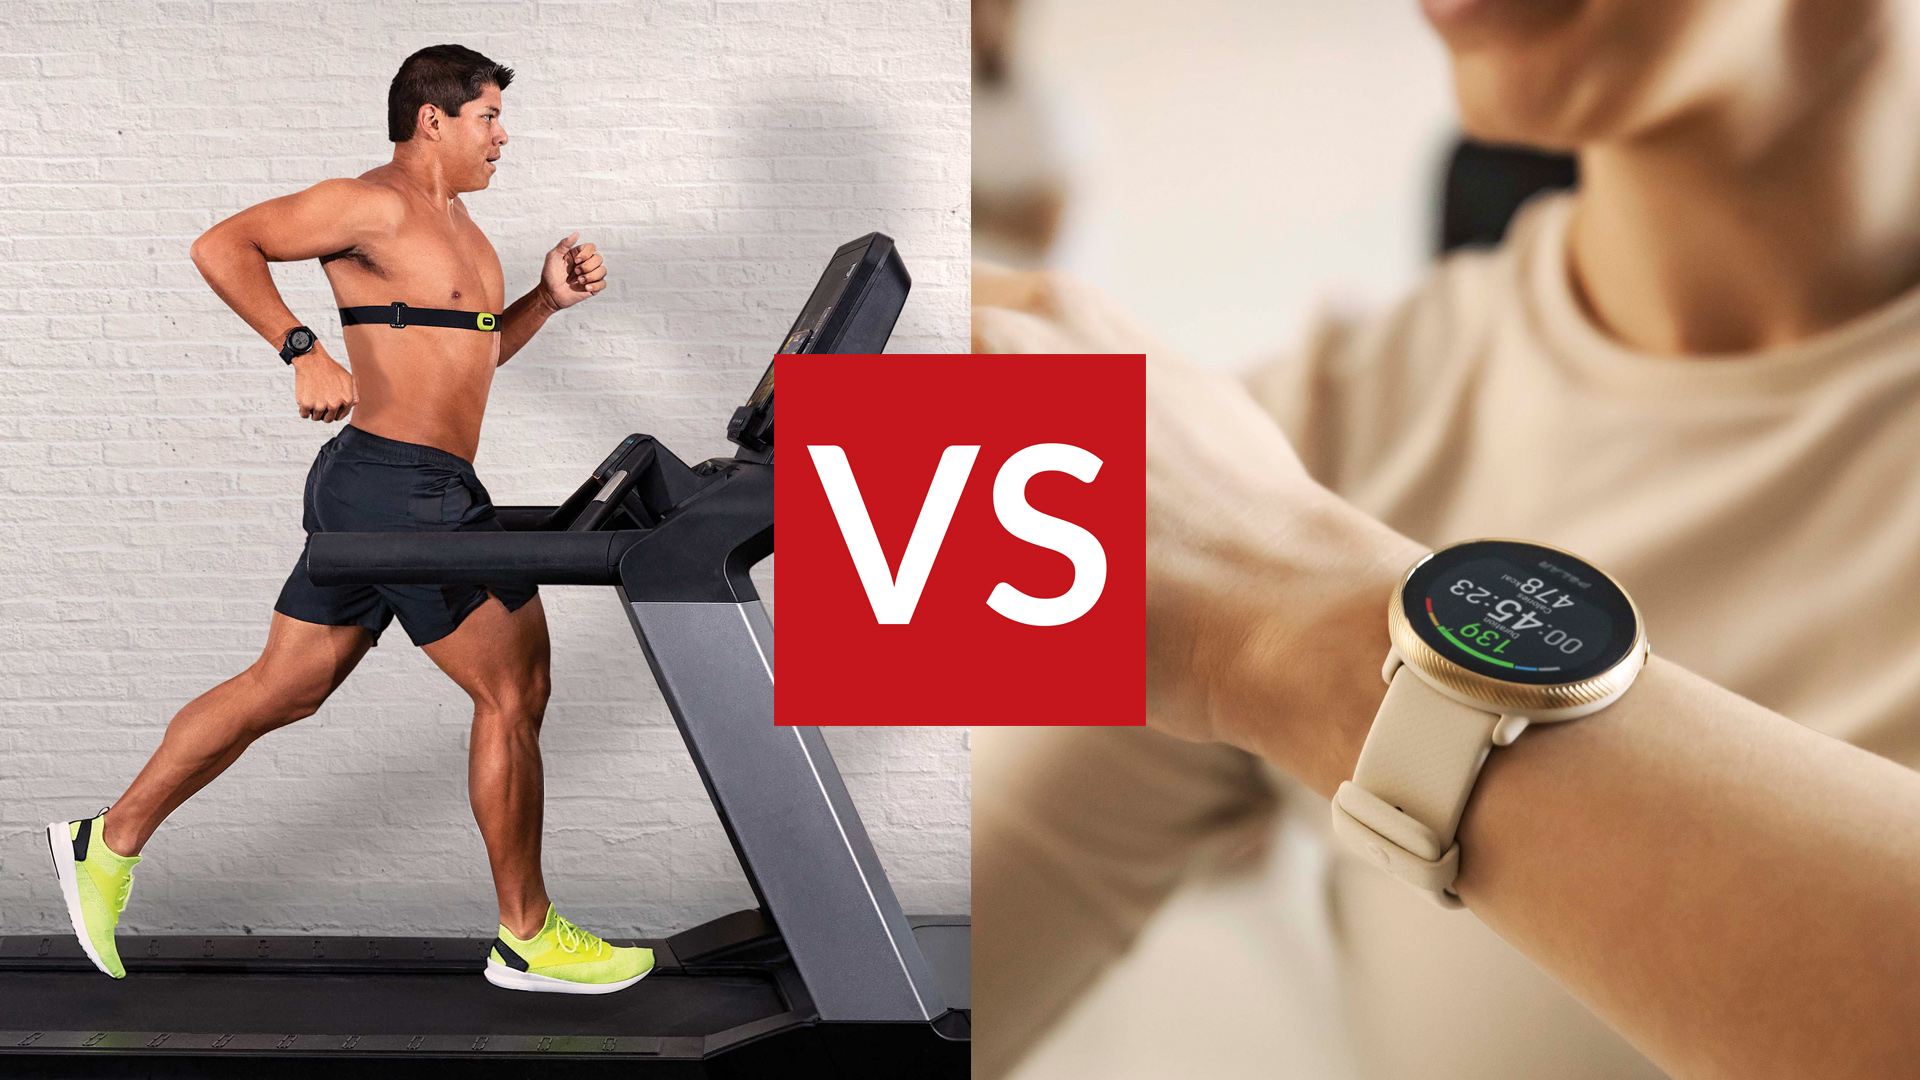 Heart Rate Monitor: Top 5 Reasons to Use One